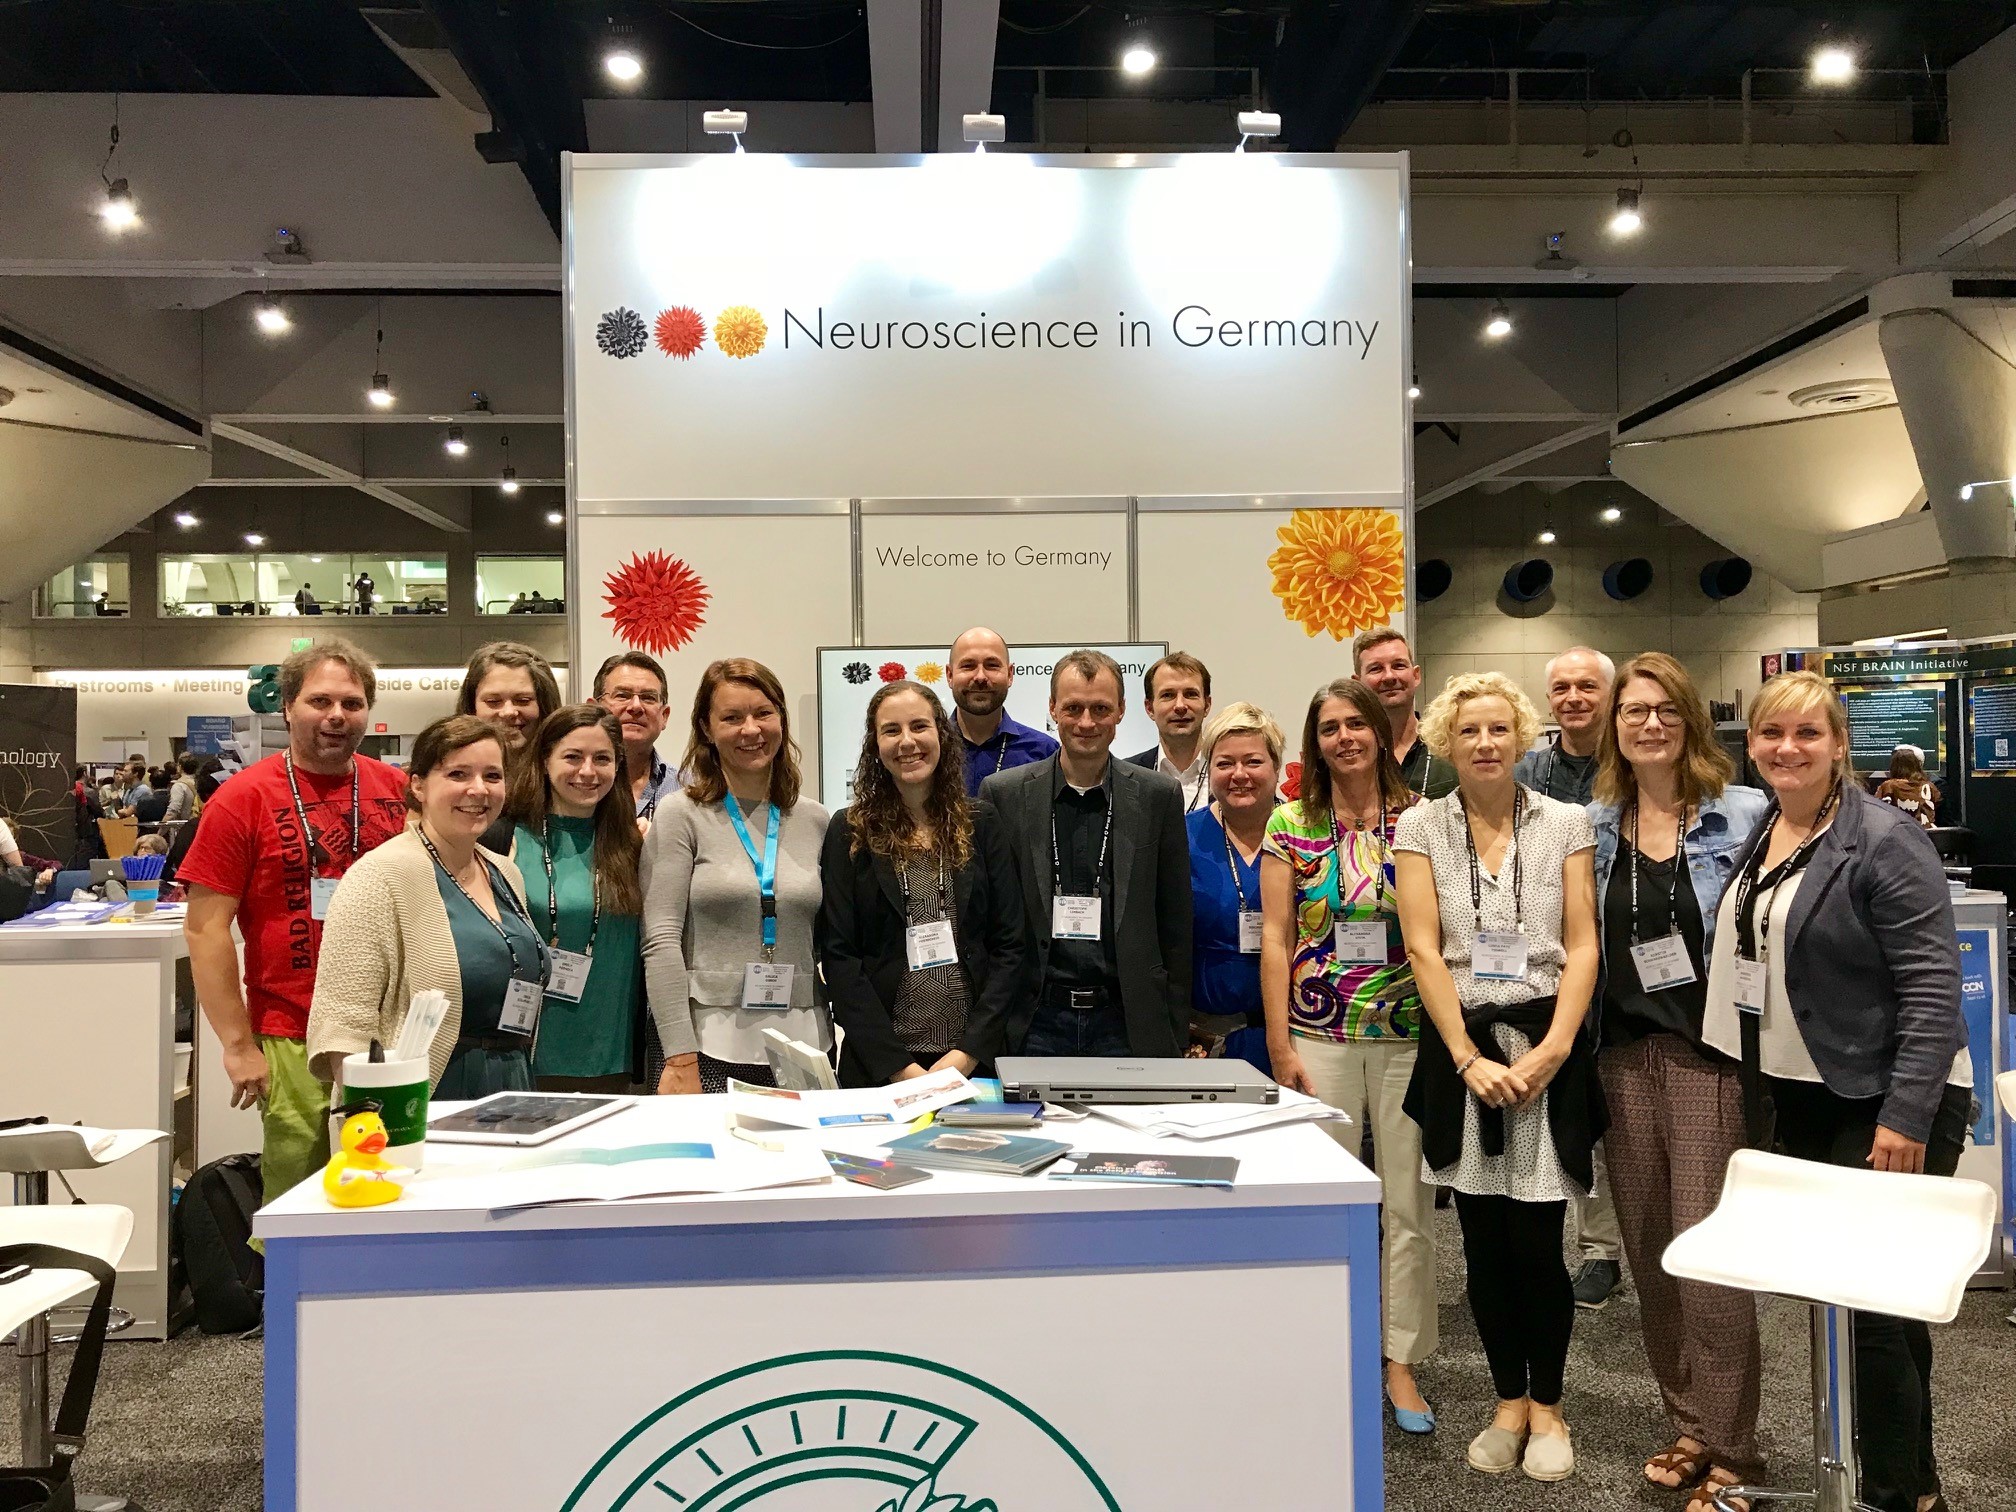 Joint “Research in Germany” booth at the annual meeting of the SfN 2018